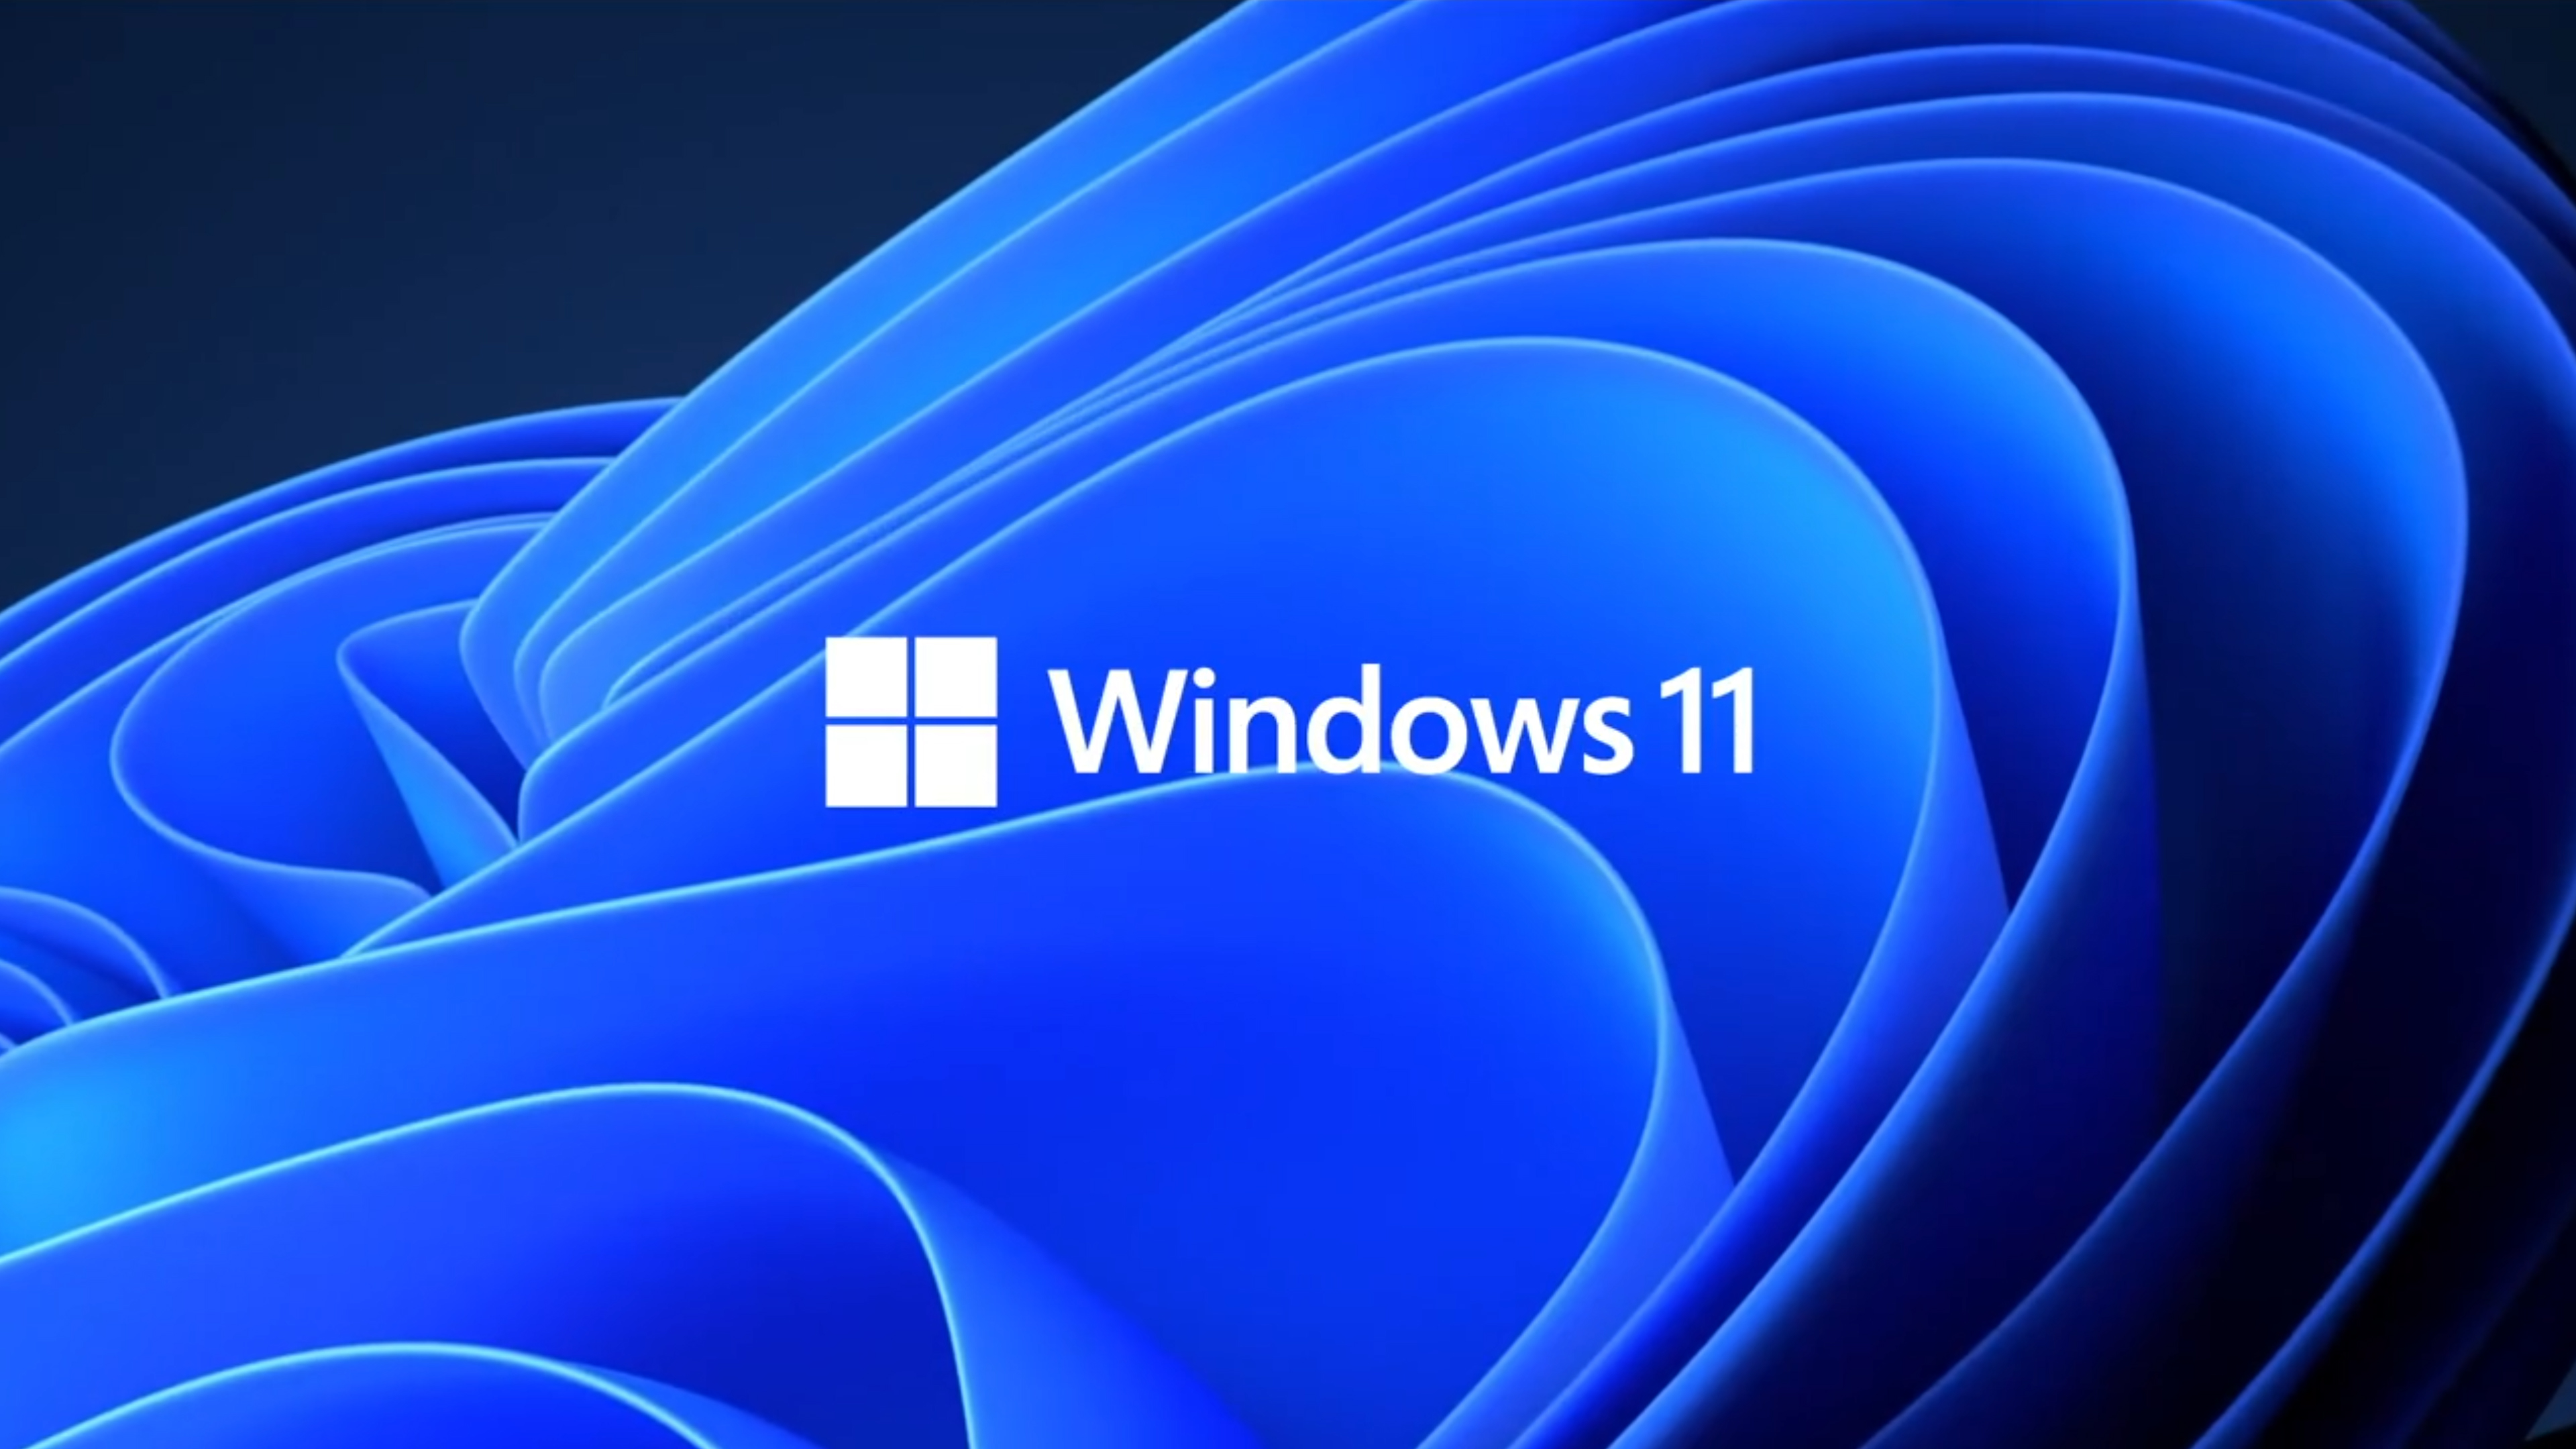 Windows 11 release date, features and everything you need to know